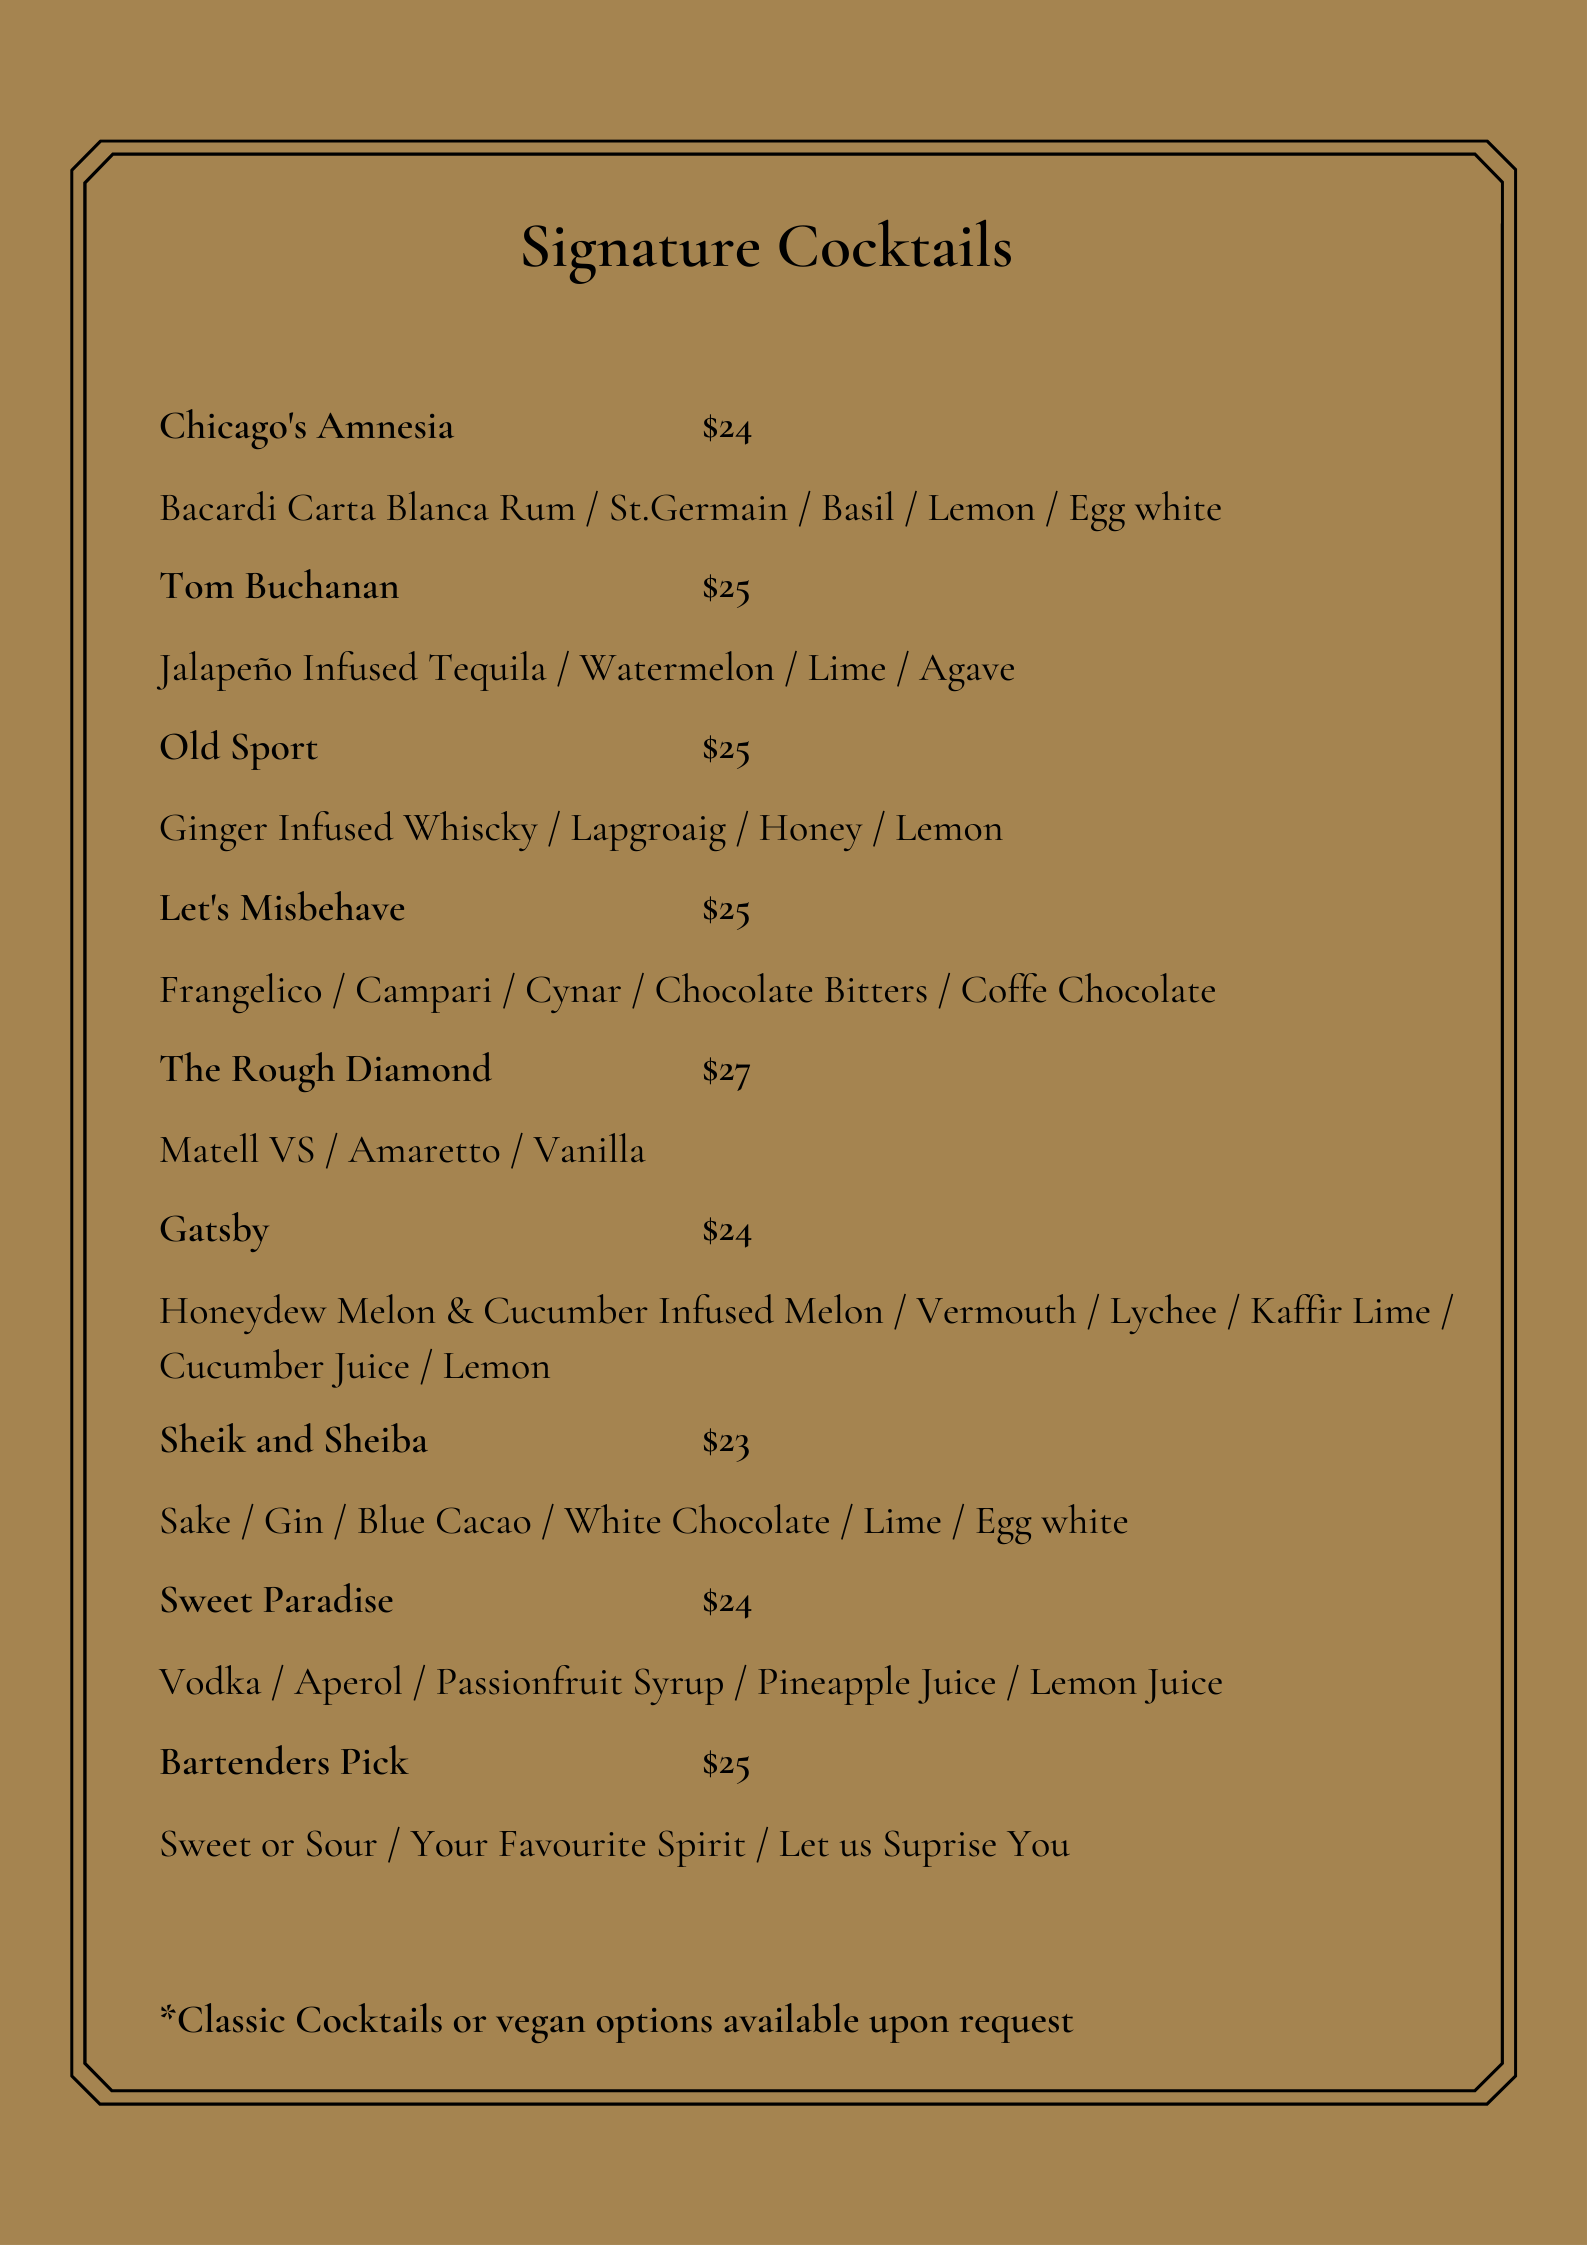 The-Cats-Meow-Drinks-Menu-Cocktails-4.png